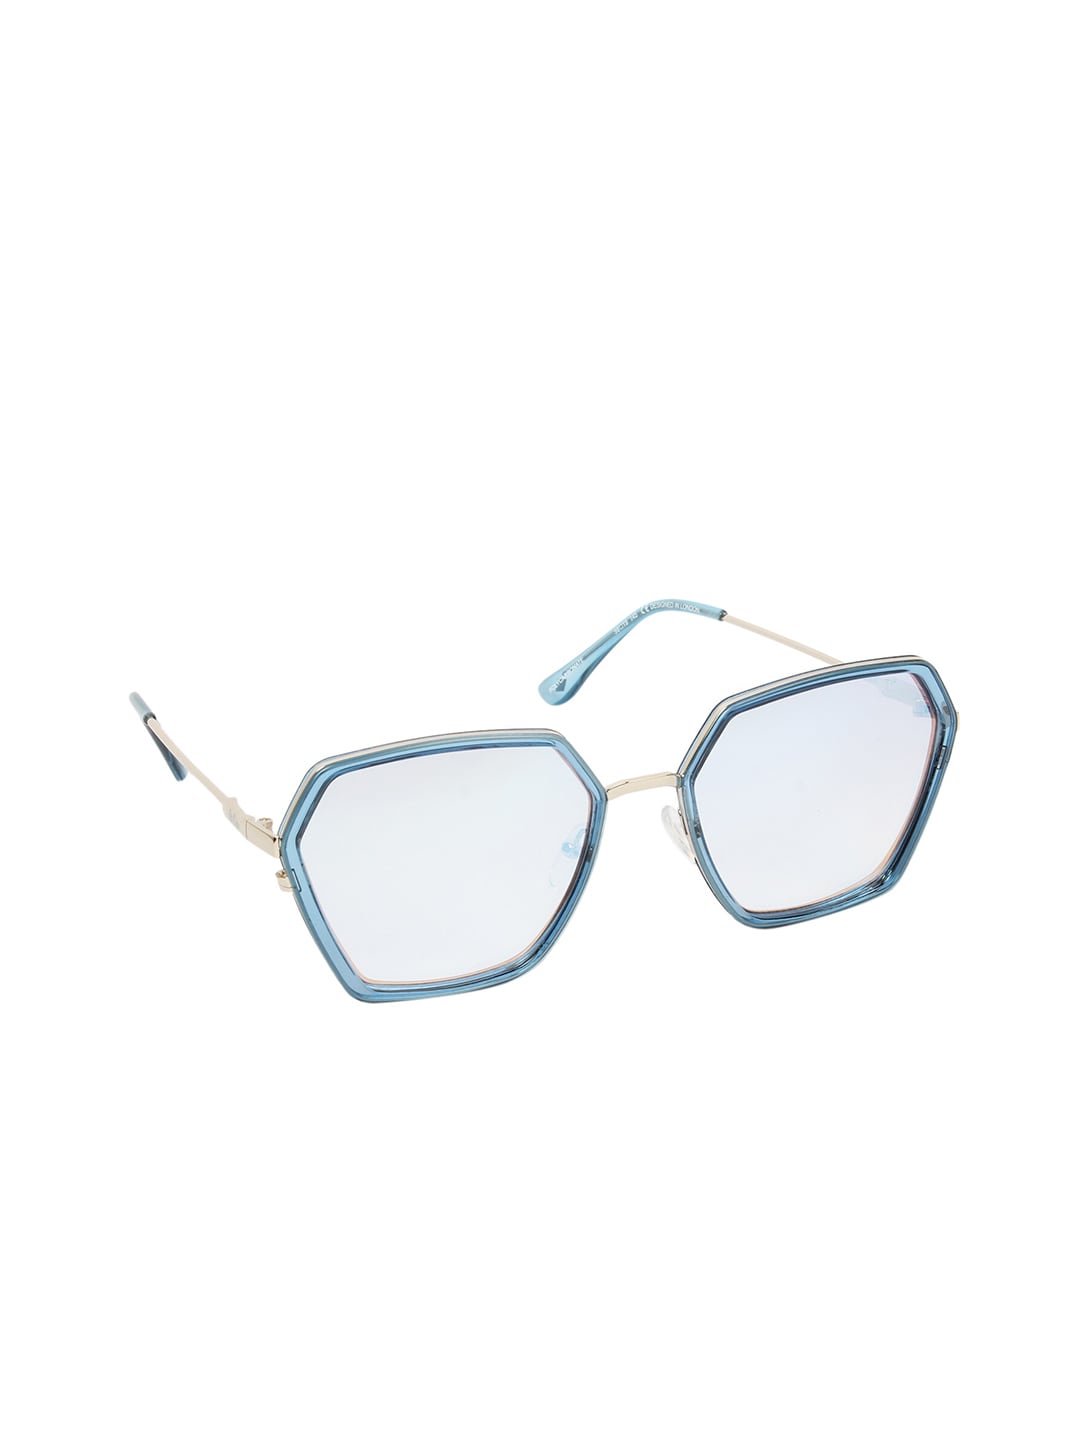 Lee Cooper Women Mirrored Lens & Blue Oversized Sunglasses with UV Protected Lens Price in India